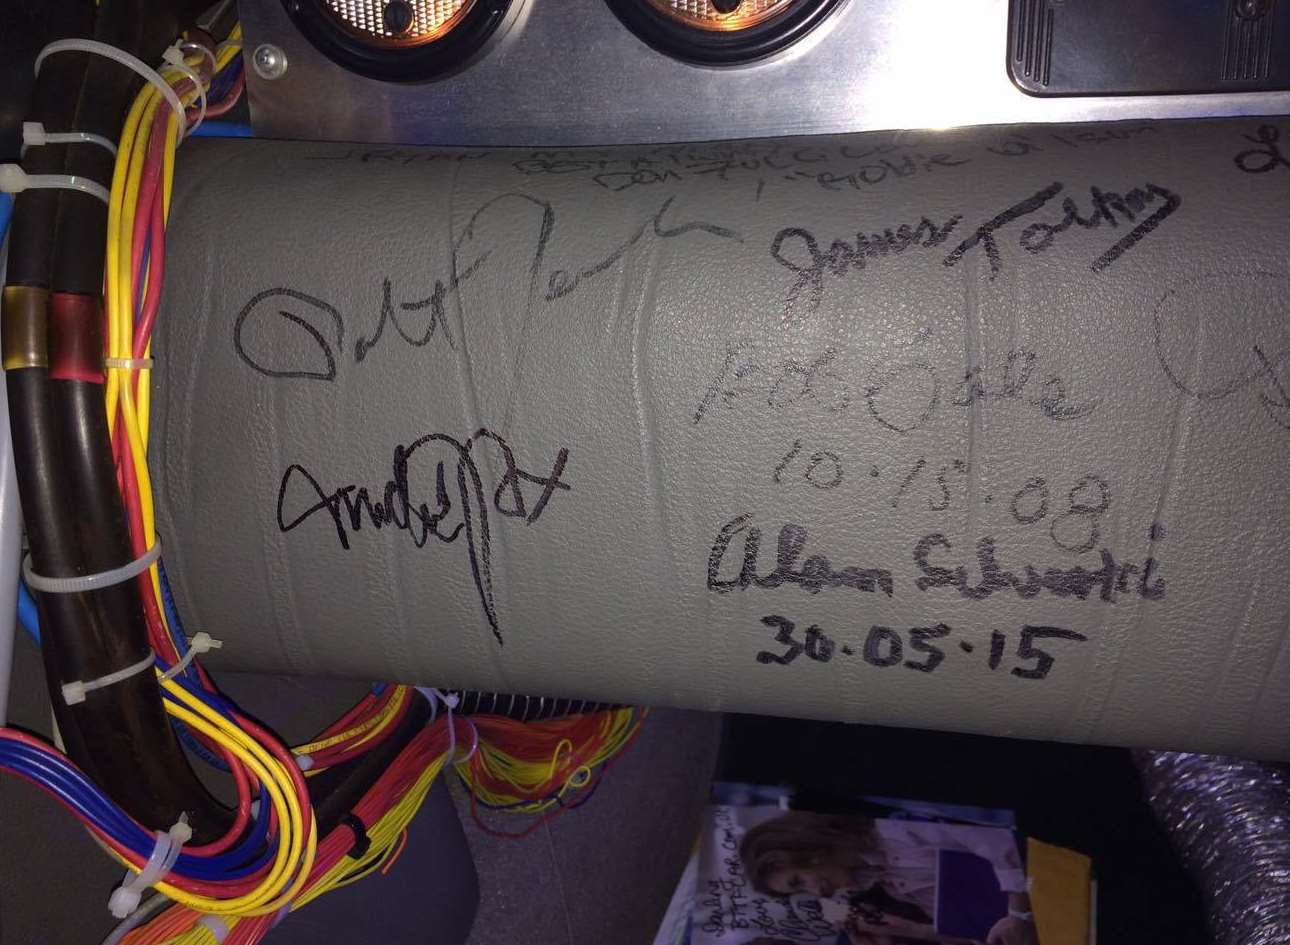 The dash is signed by the cast and crew and is the only car in the world with all the signatures.